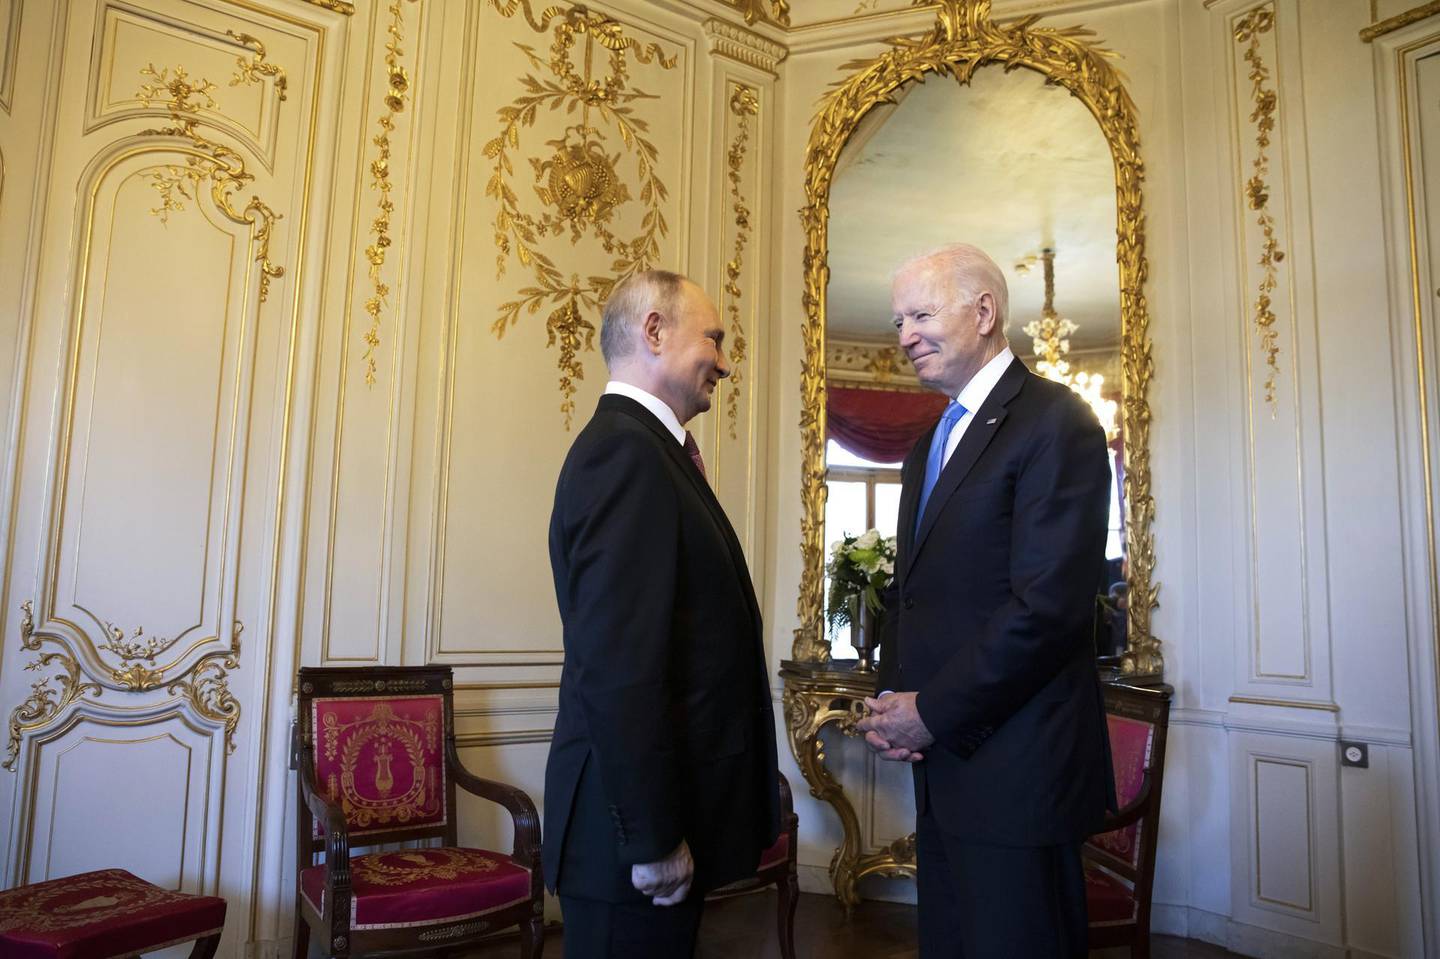 MANDATORY CREDIT. NO SALES. NO ARCHIVES. Vladimir Putin, Russia's president, left, and U.S. President Joe Biden, right, react at the start of the U.S. Russia summit at Villa La Grange in Geneva, Switzerland, on Wednesday, June 16, 2021. Joe Biden and Vladimir Putin kick off what could be more than four hours of meetings on Wednesday afternoon in Geneva, with officials from both countries keeping expectations low for any breakthrough agreement. Photographer: Peter Klaunzer/Swiss Federal Office of Foreign Affairs/Bloomberg